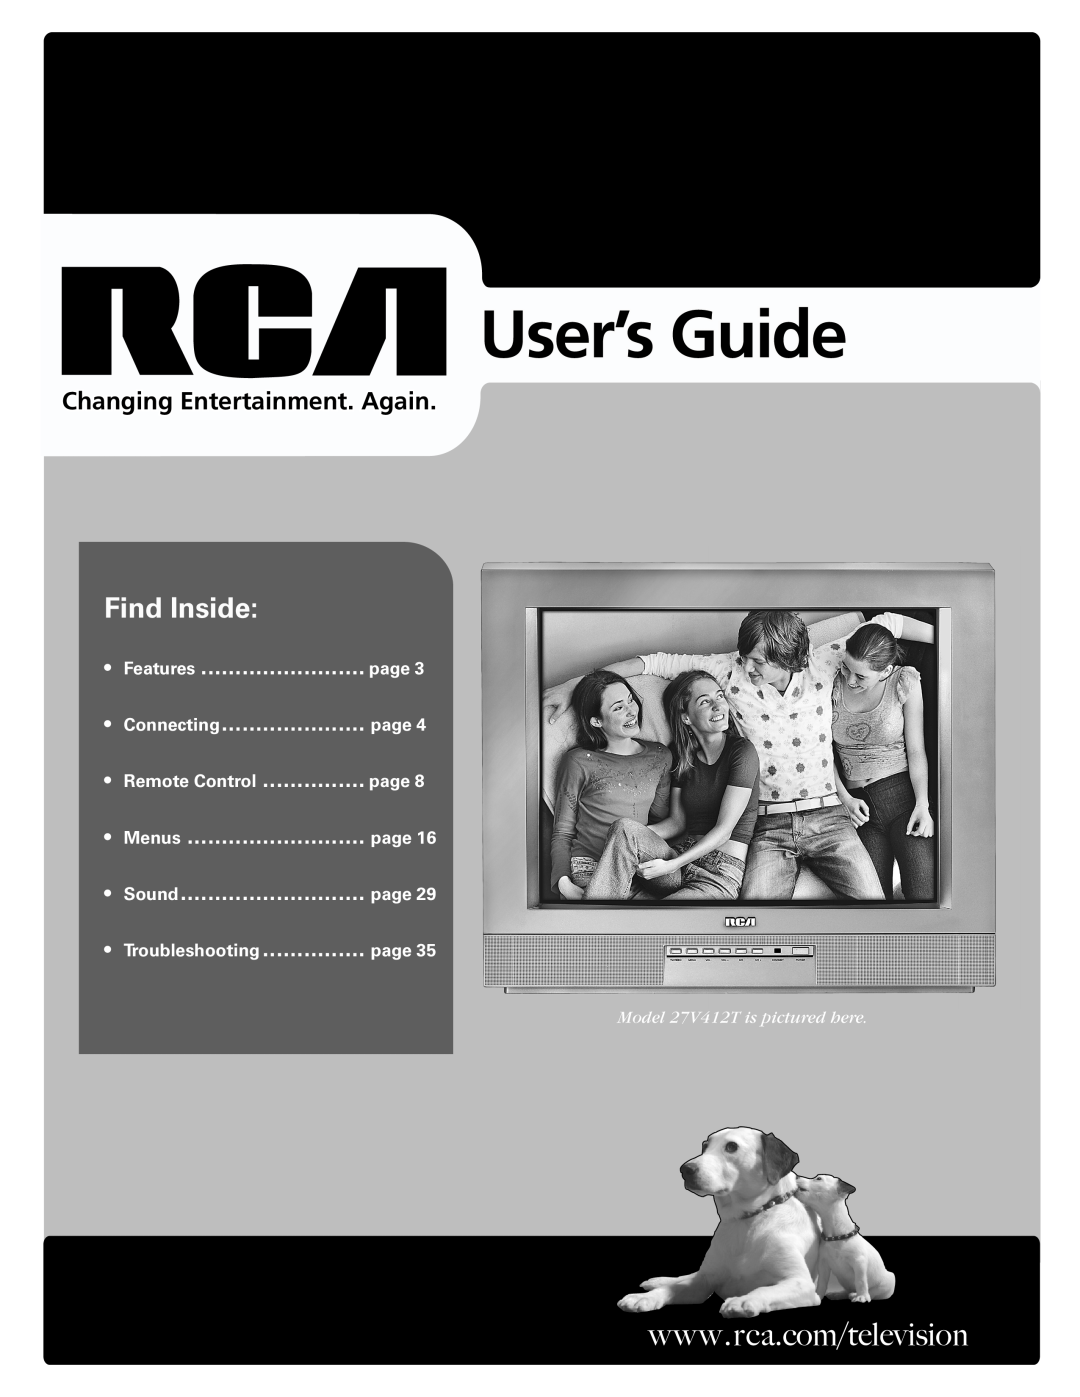 RCA 27V412T manual Changing Entertainment. Again, User’s Guide, FindInside, Favorite Channel, Remote Control, Connecting 